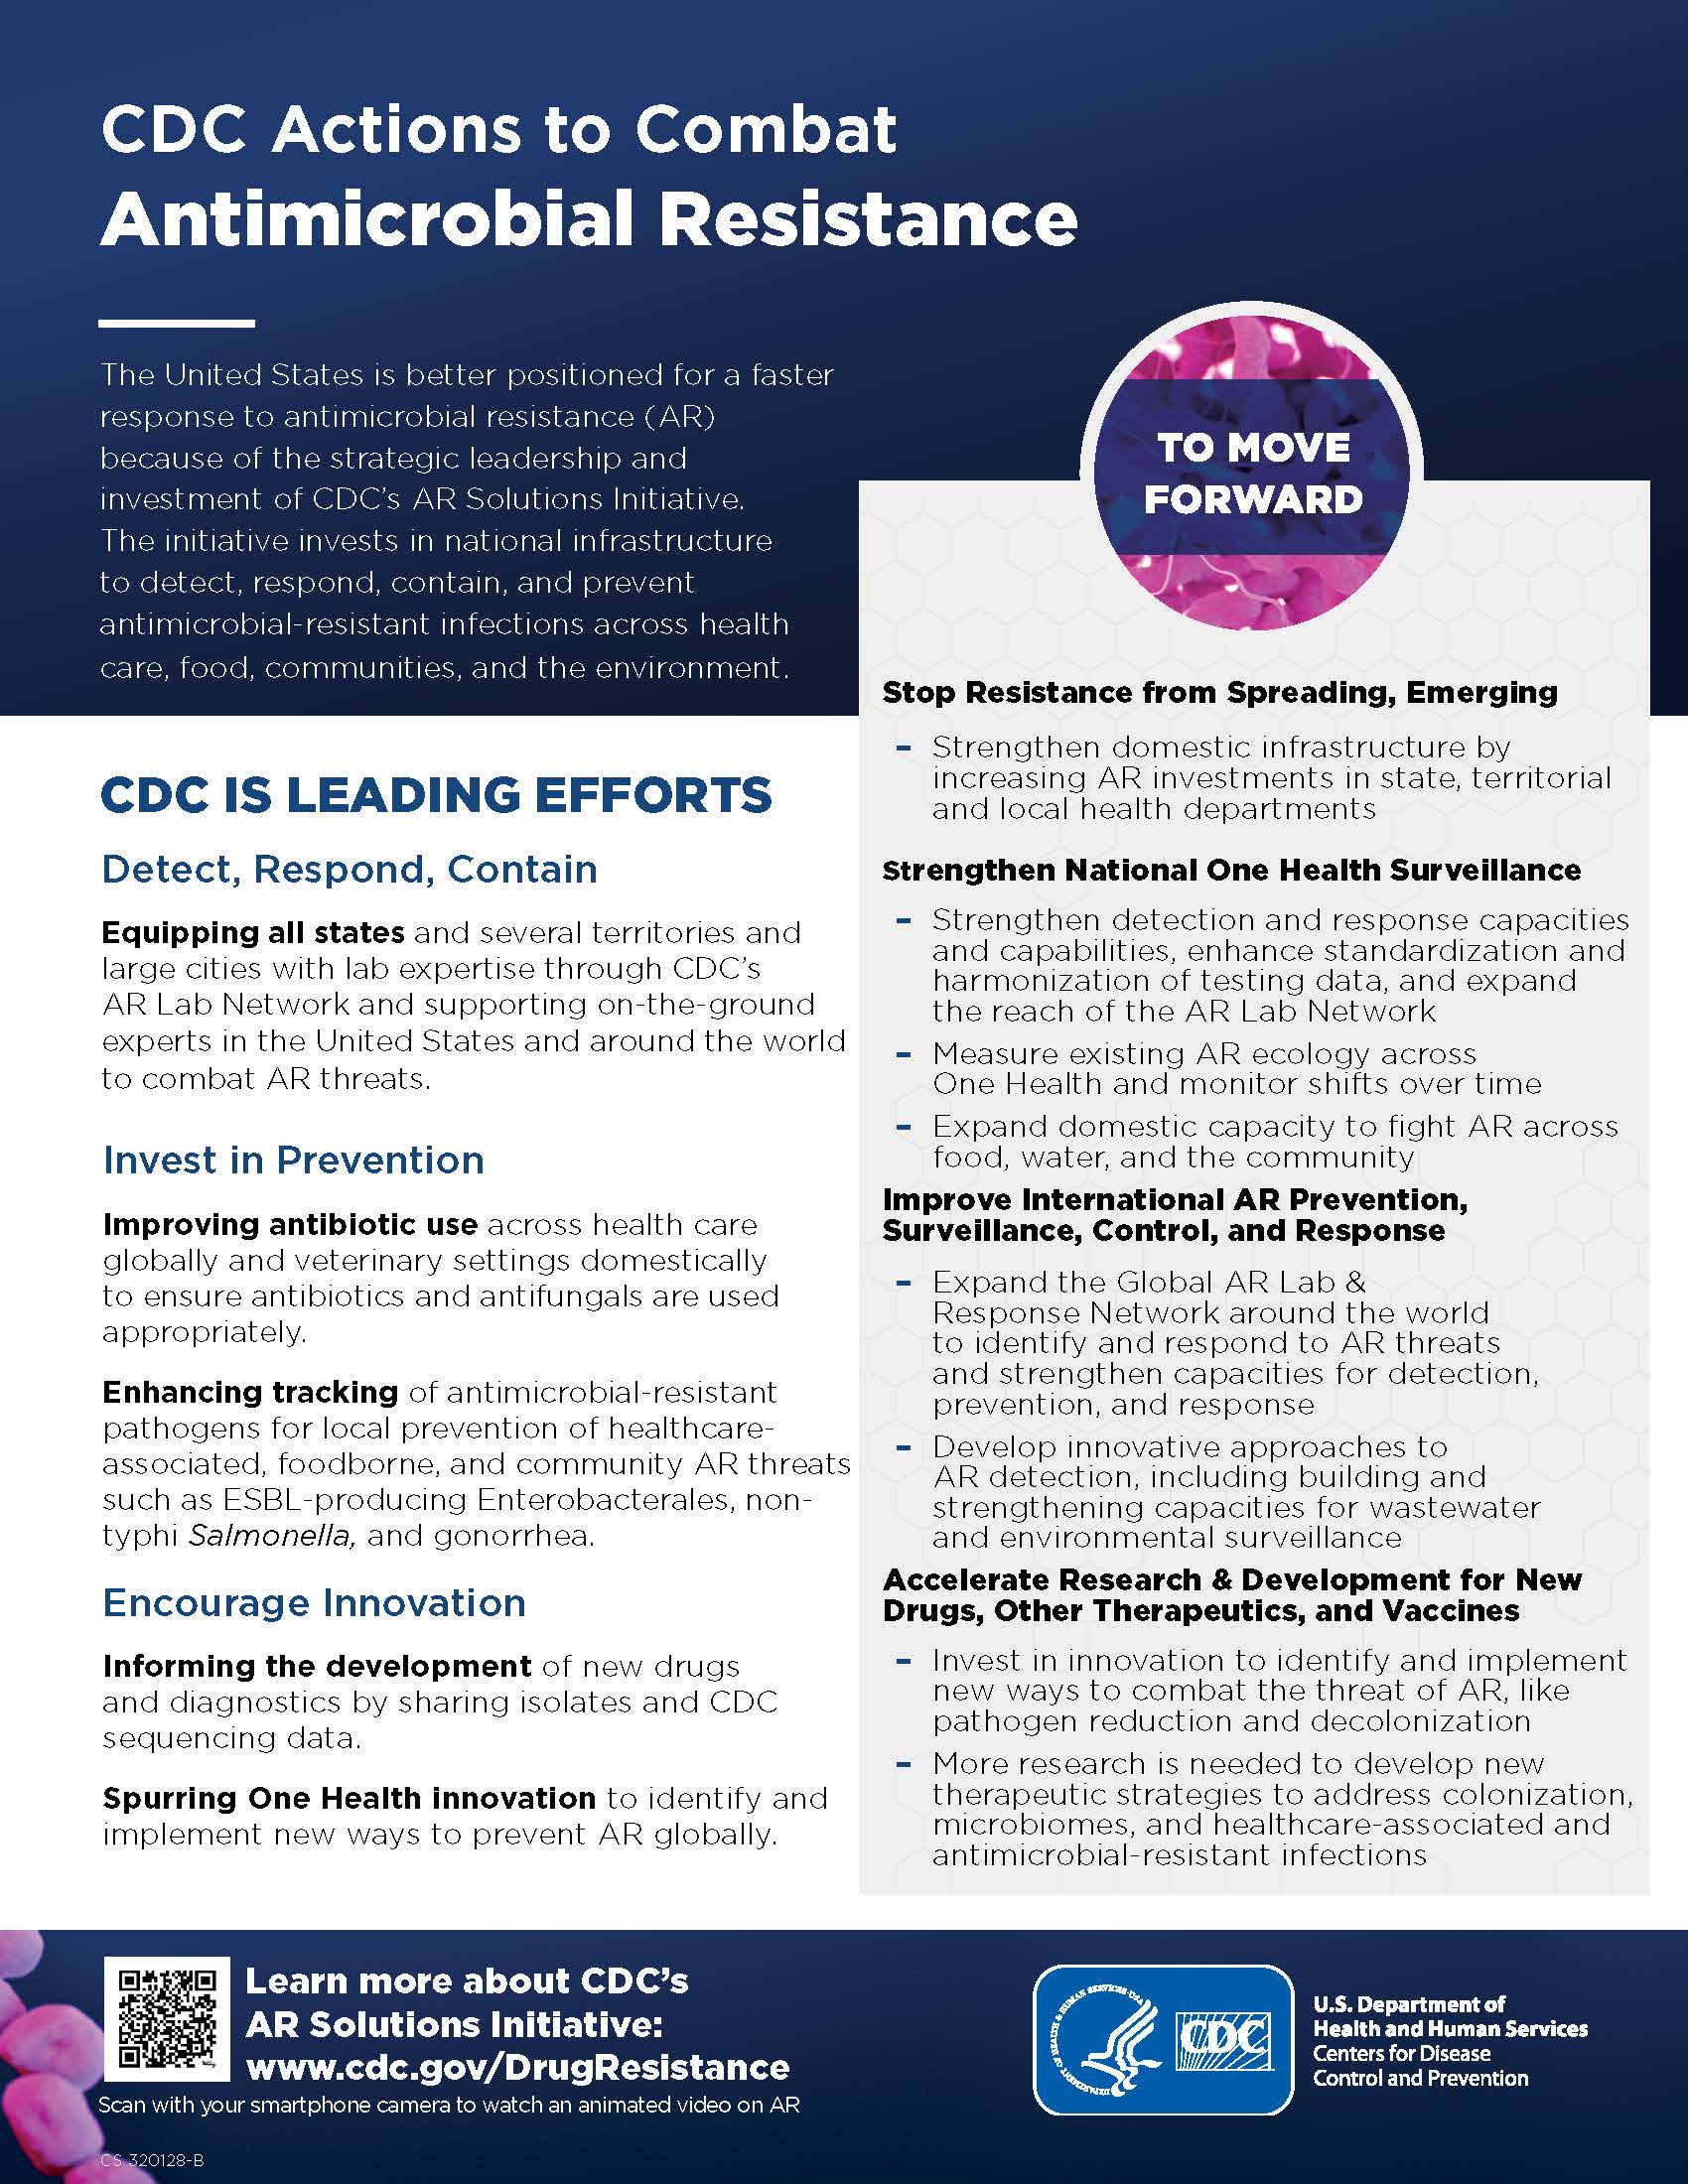 CDC Actions to Combat Resistance